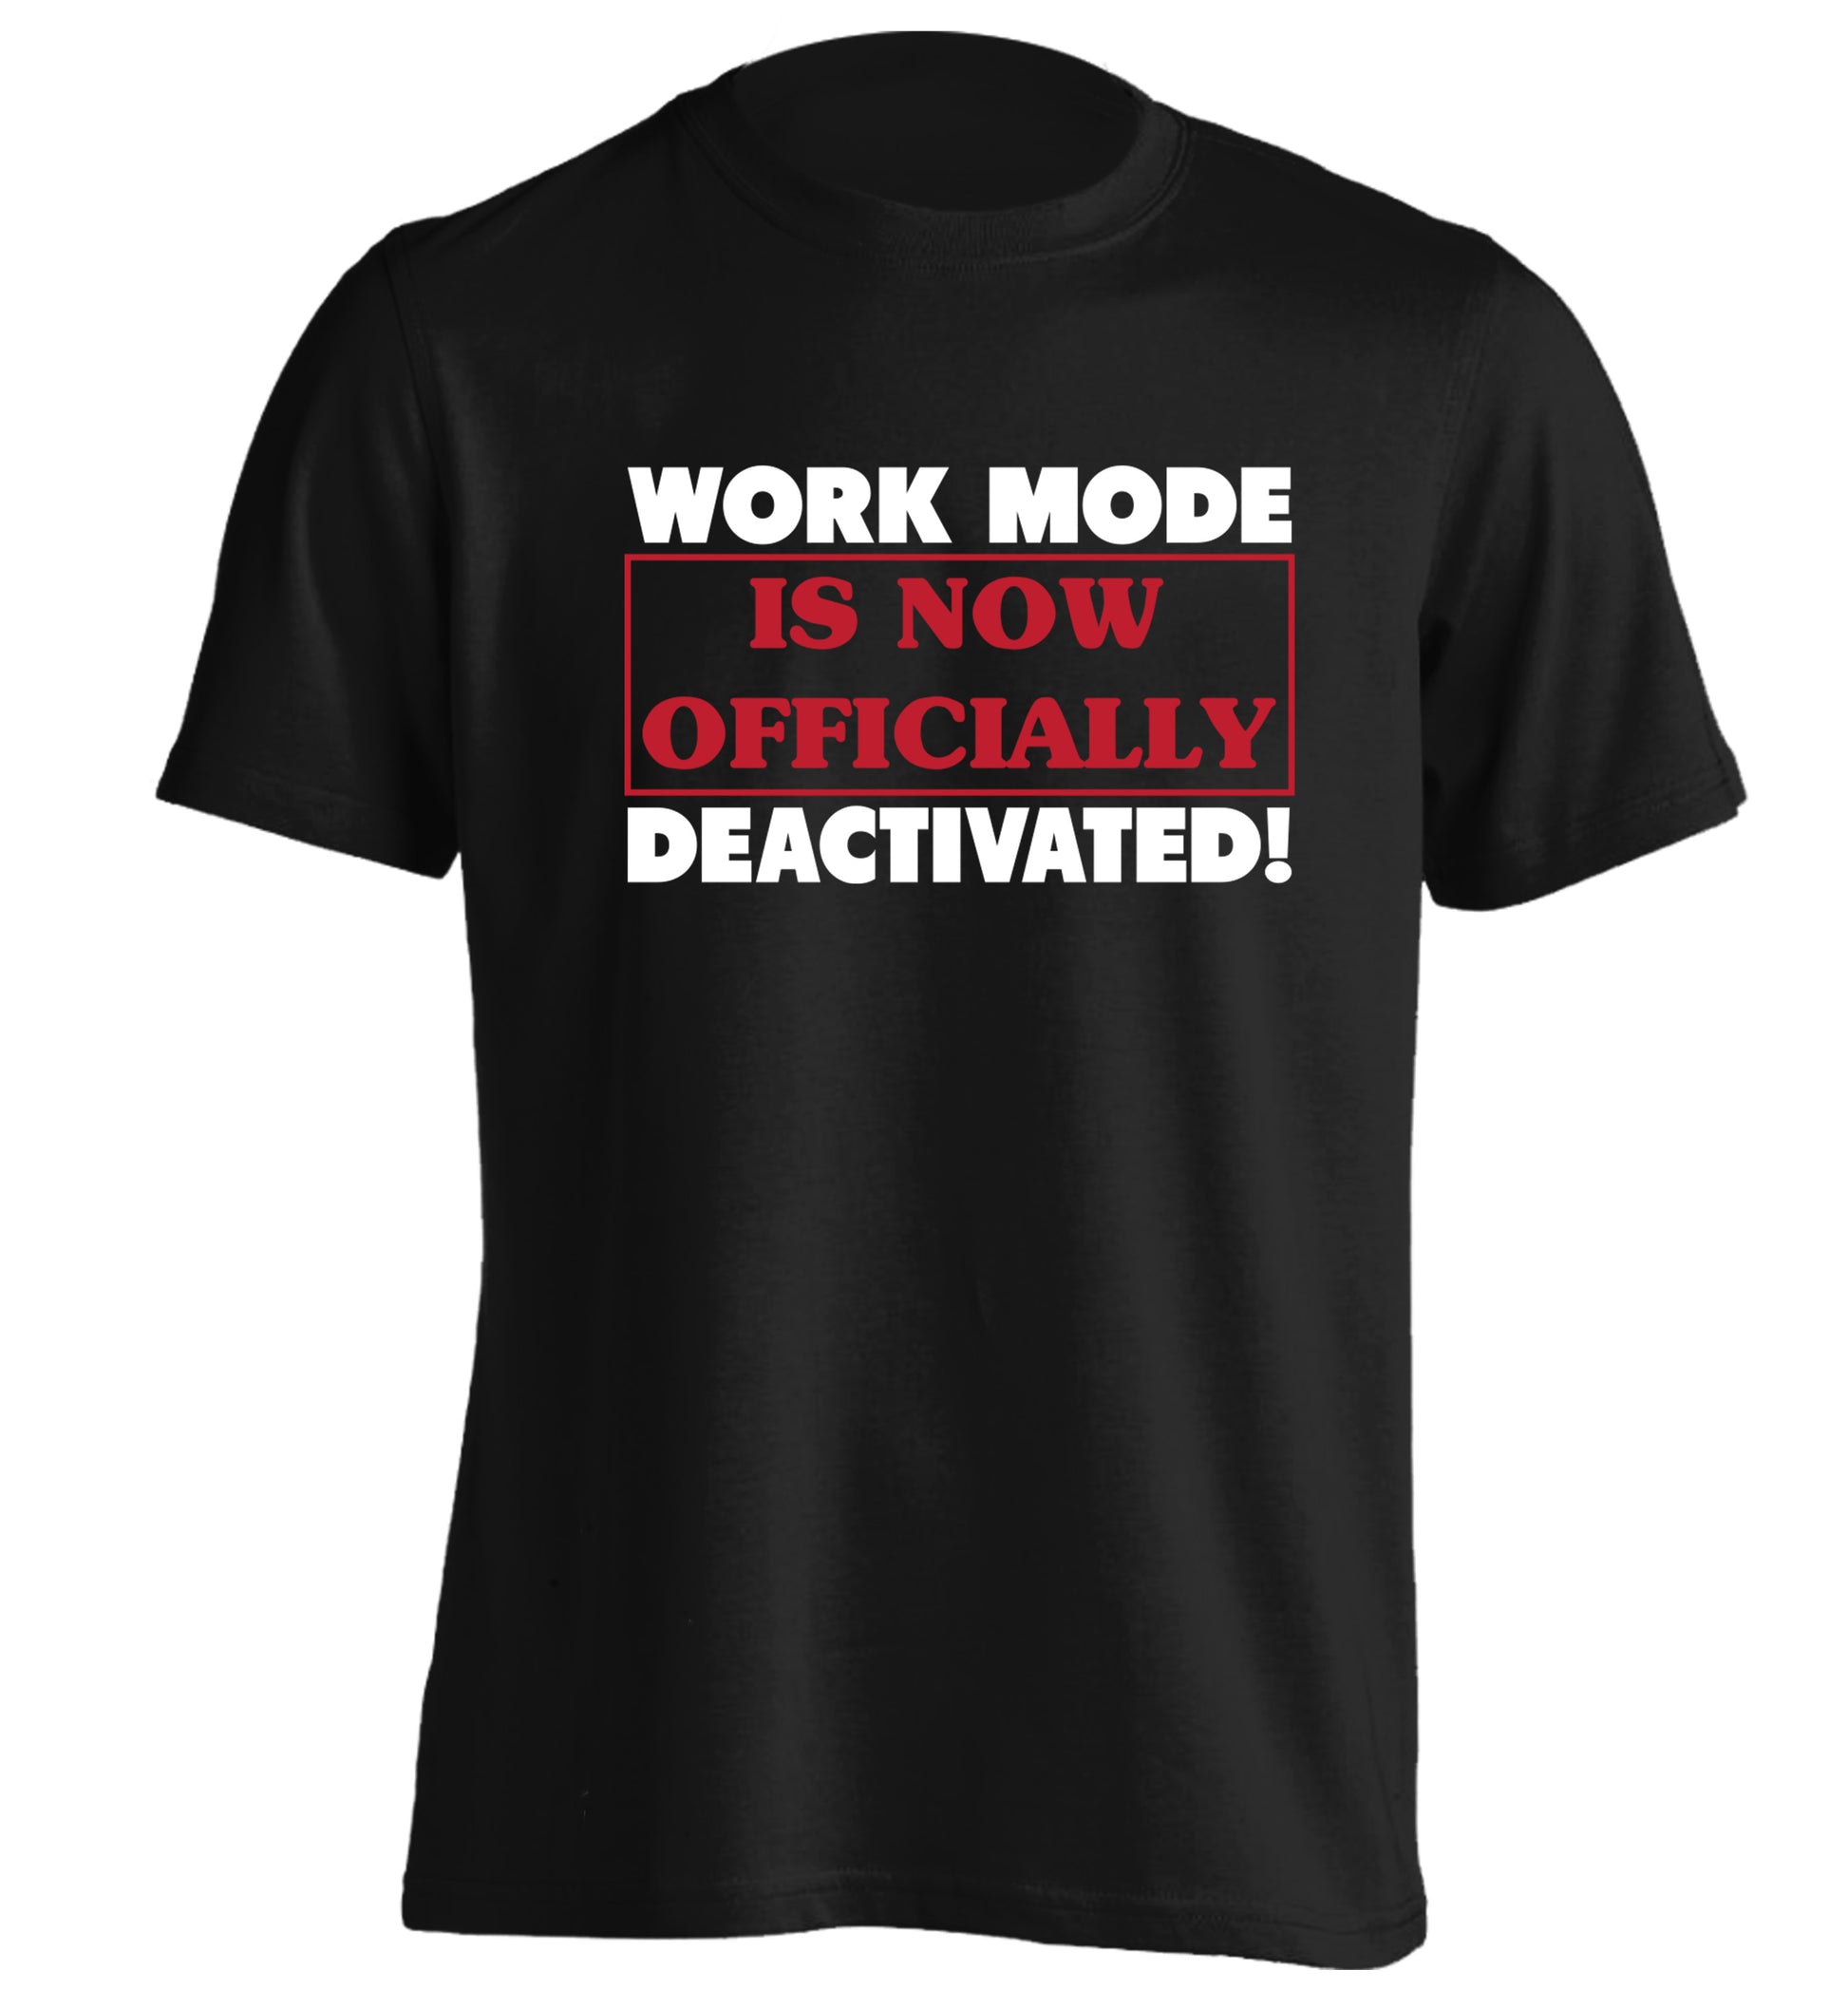 Work mode is now officially deactivated adults unisex black Tshirt 2XL